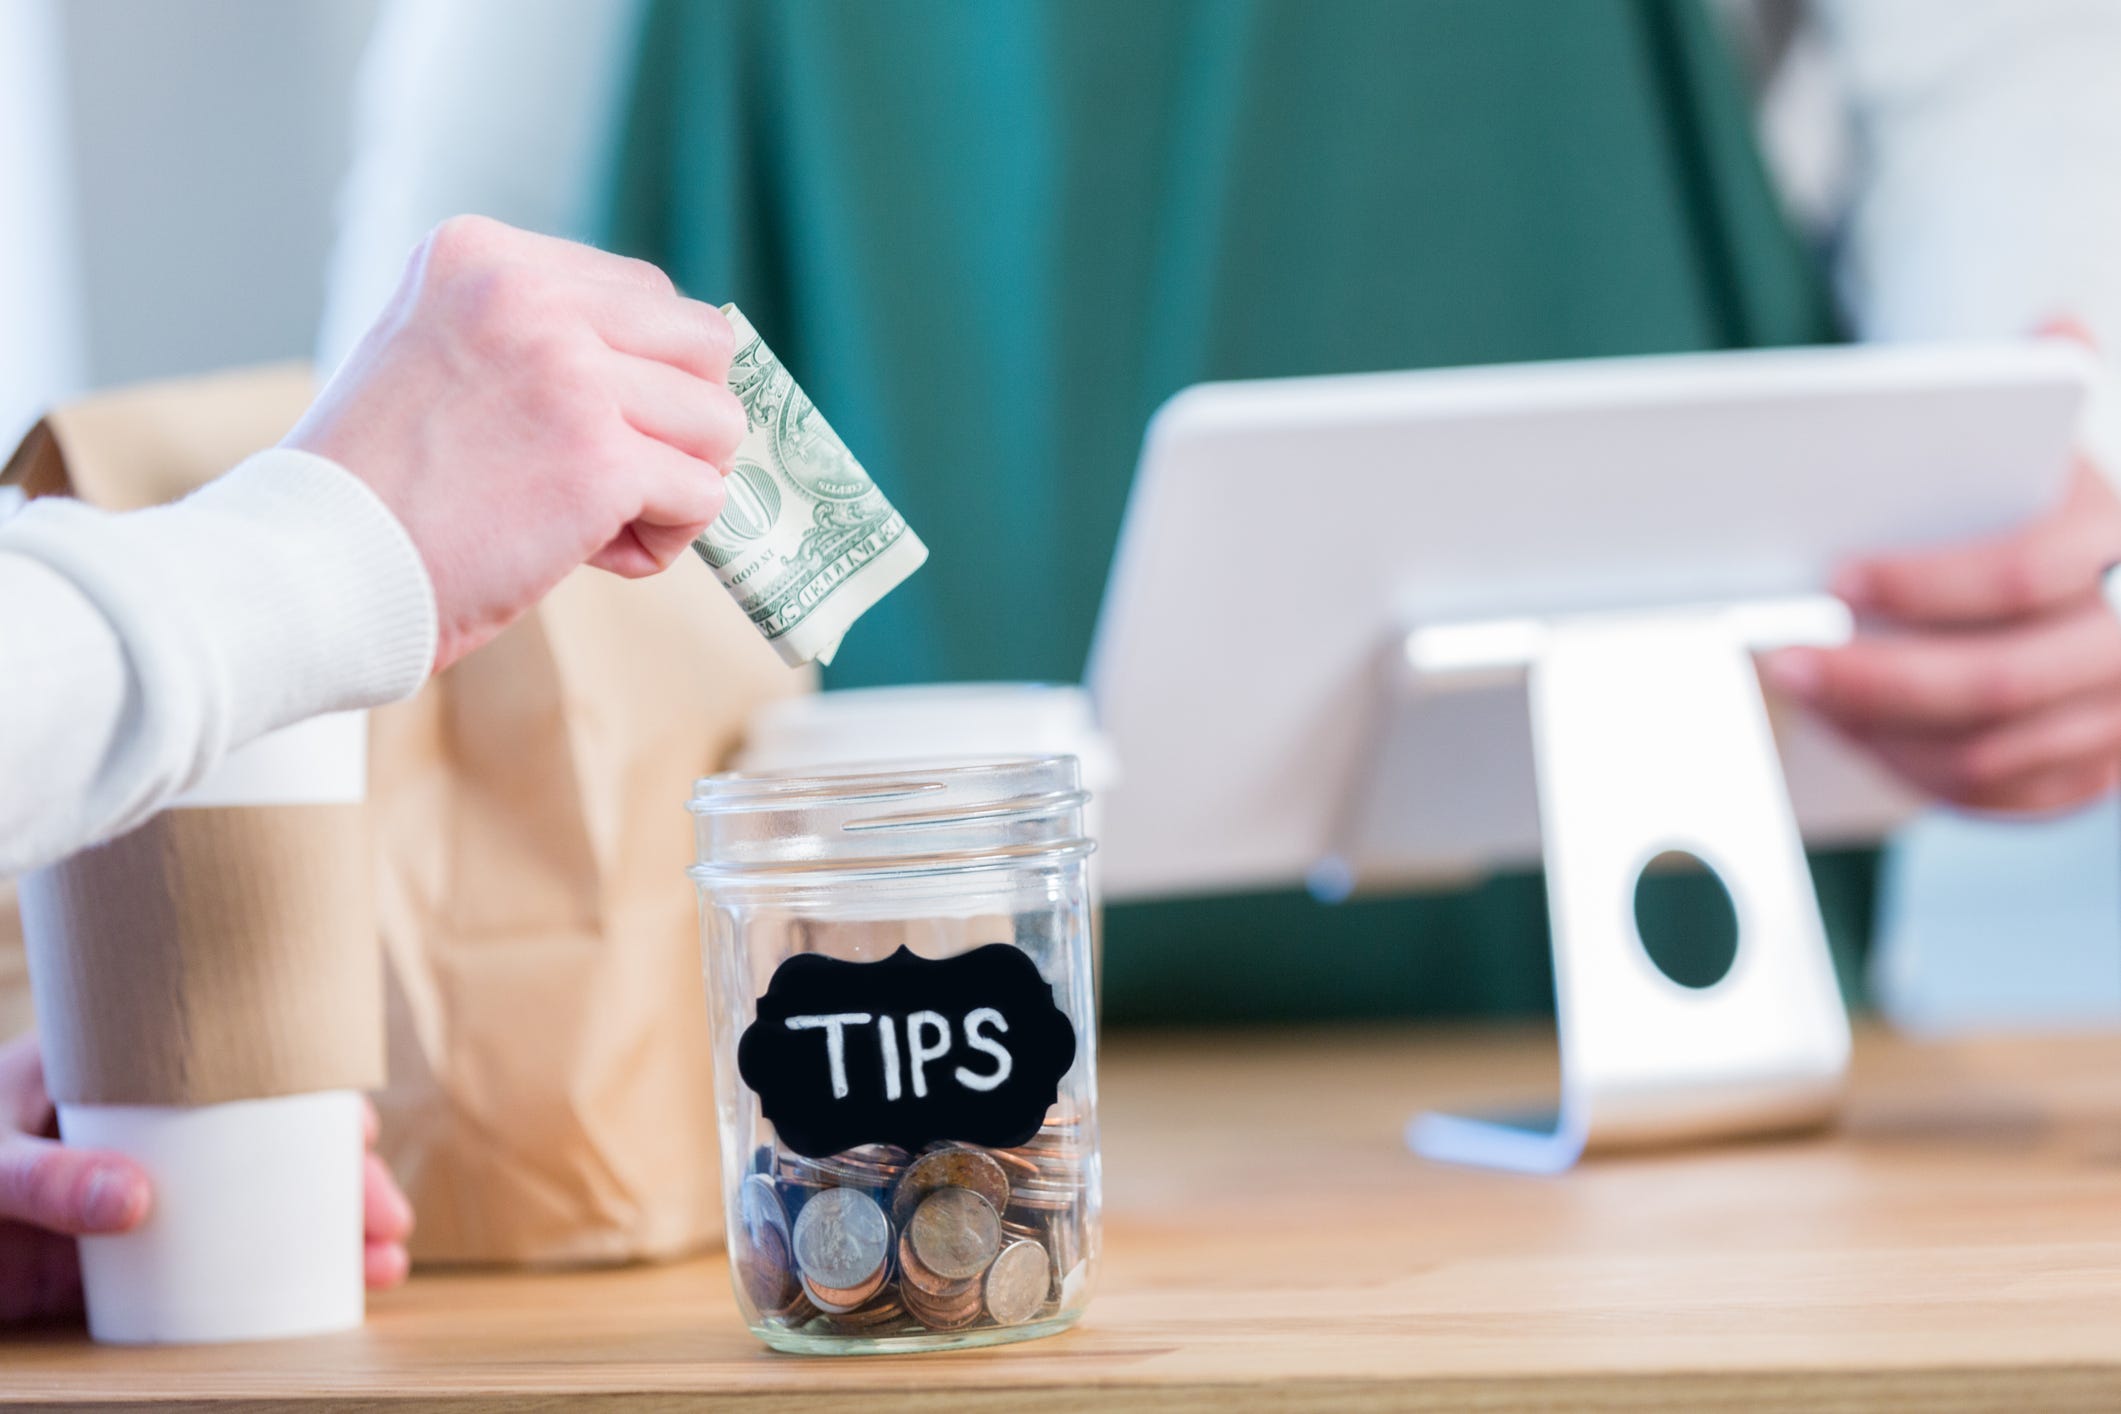 americans are reluctantly spending $500 a year tipping, a new study says.